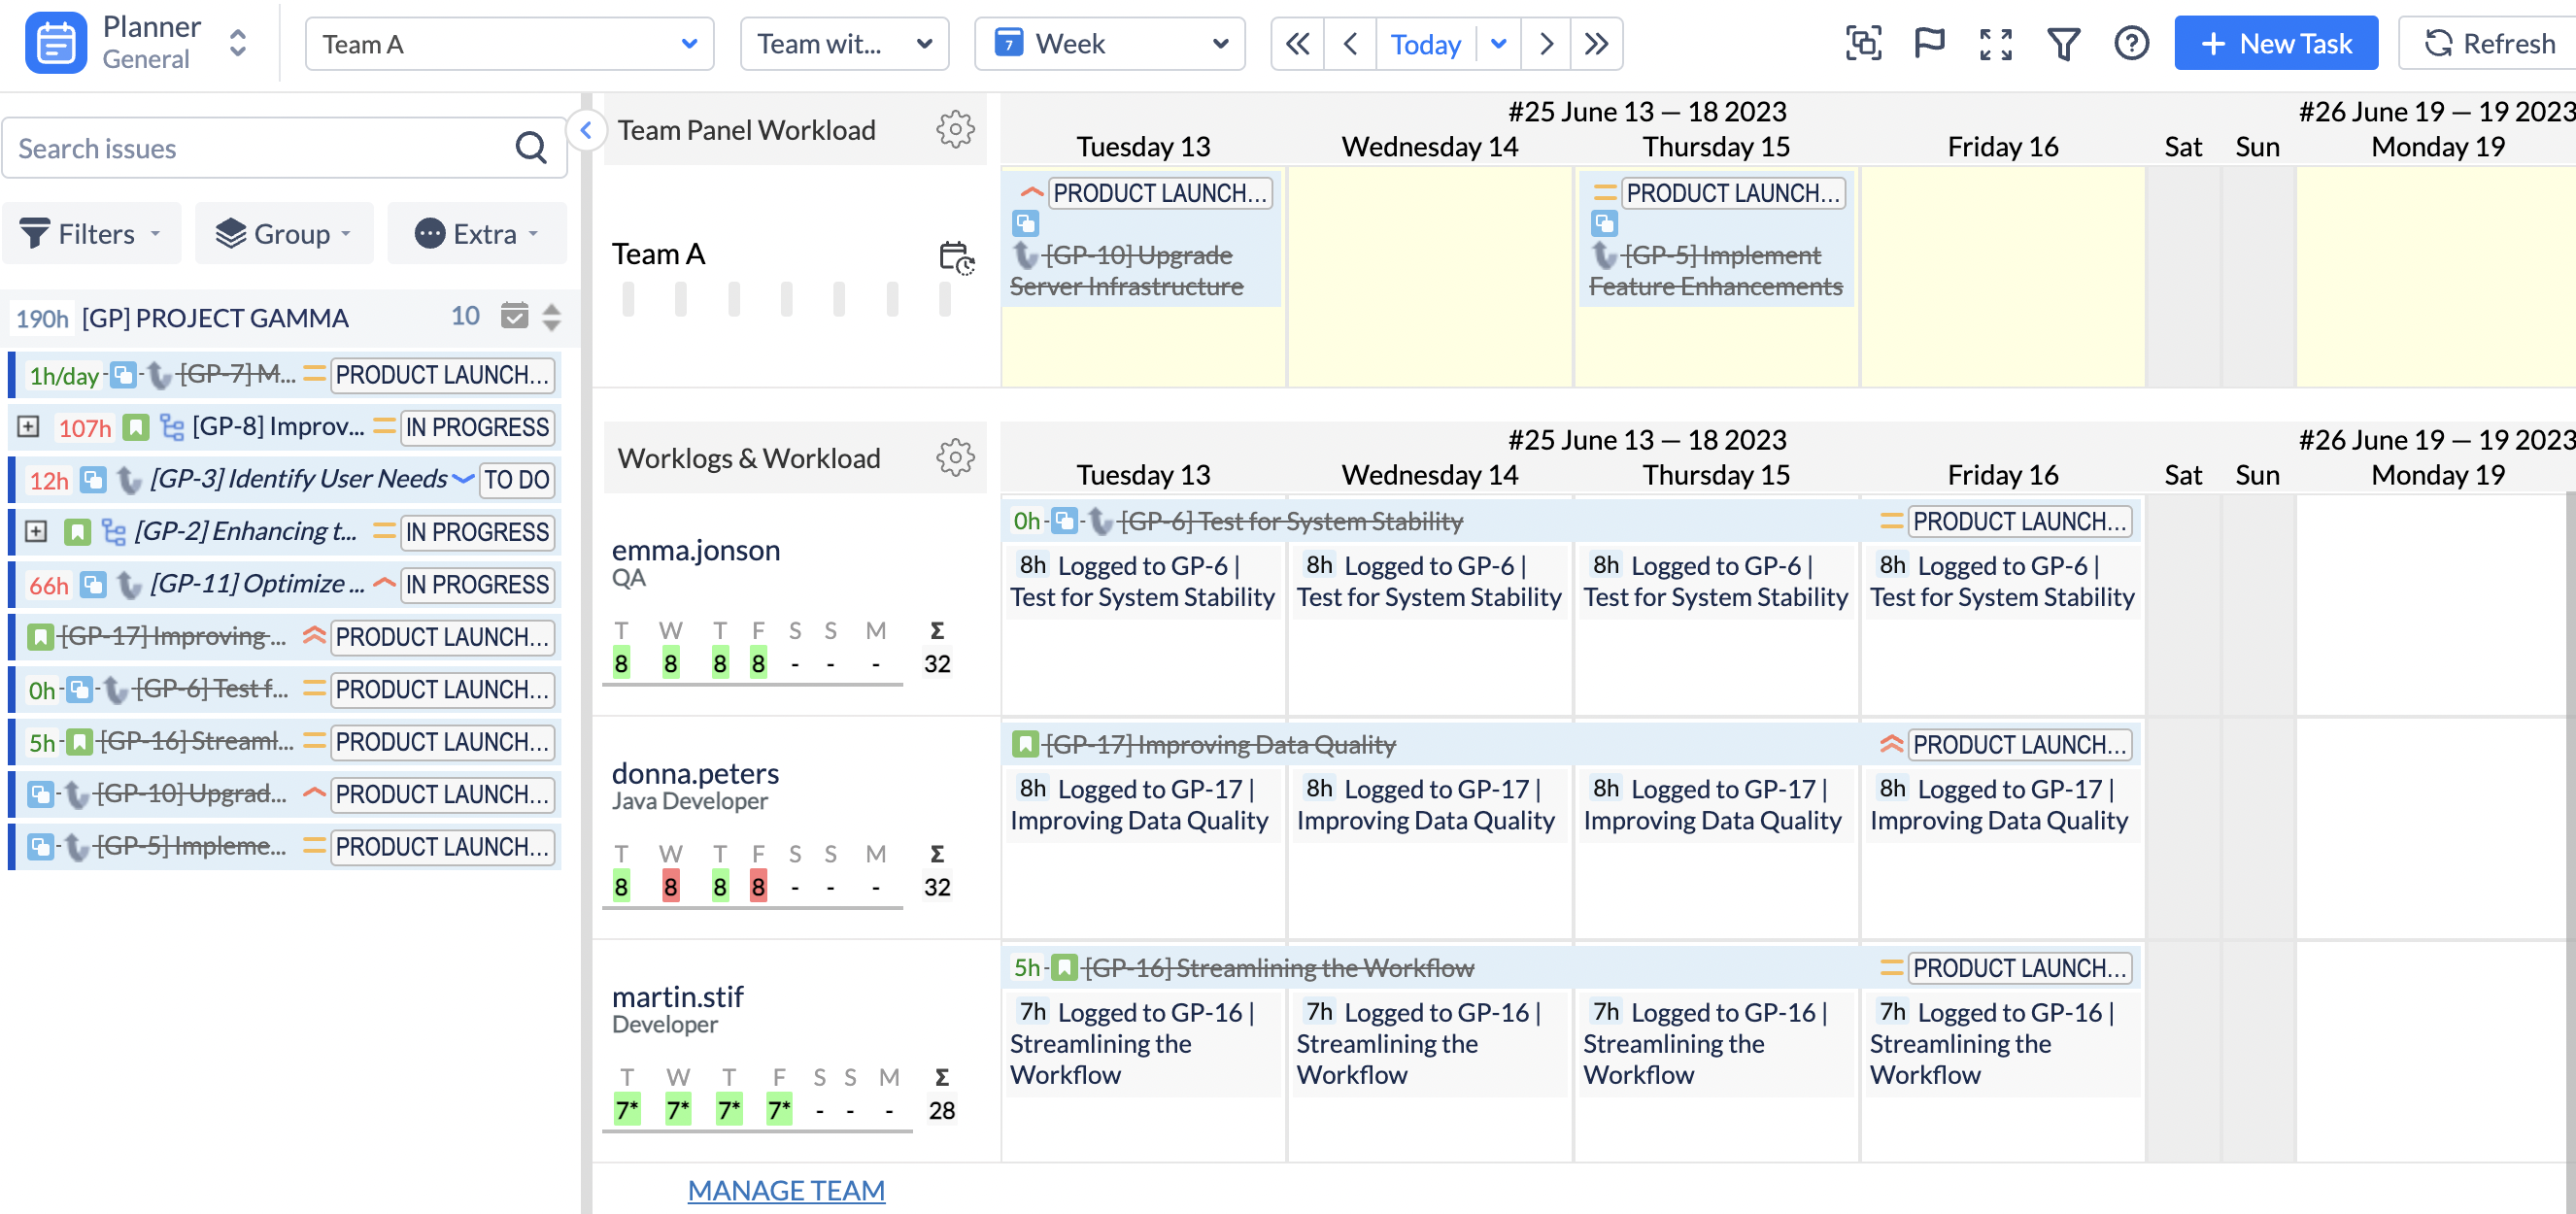 Team and user workload in Jira - ActivityTimeline